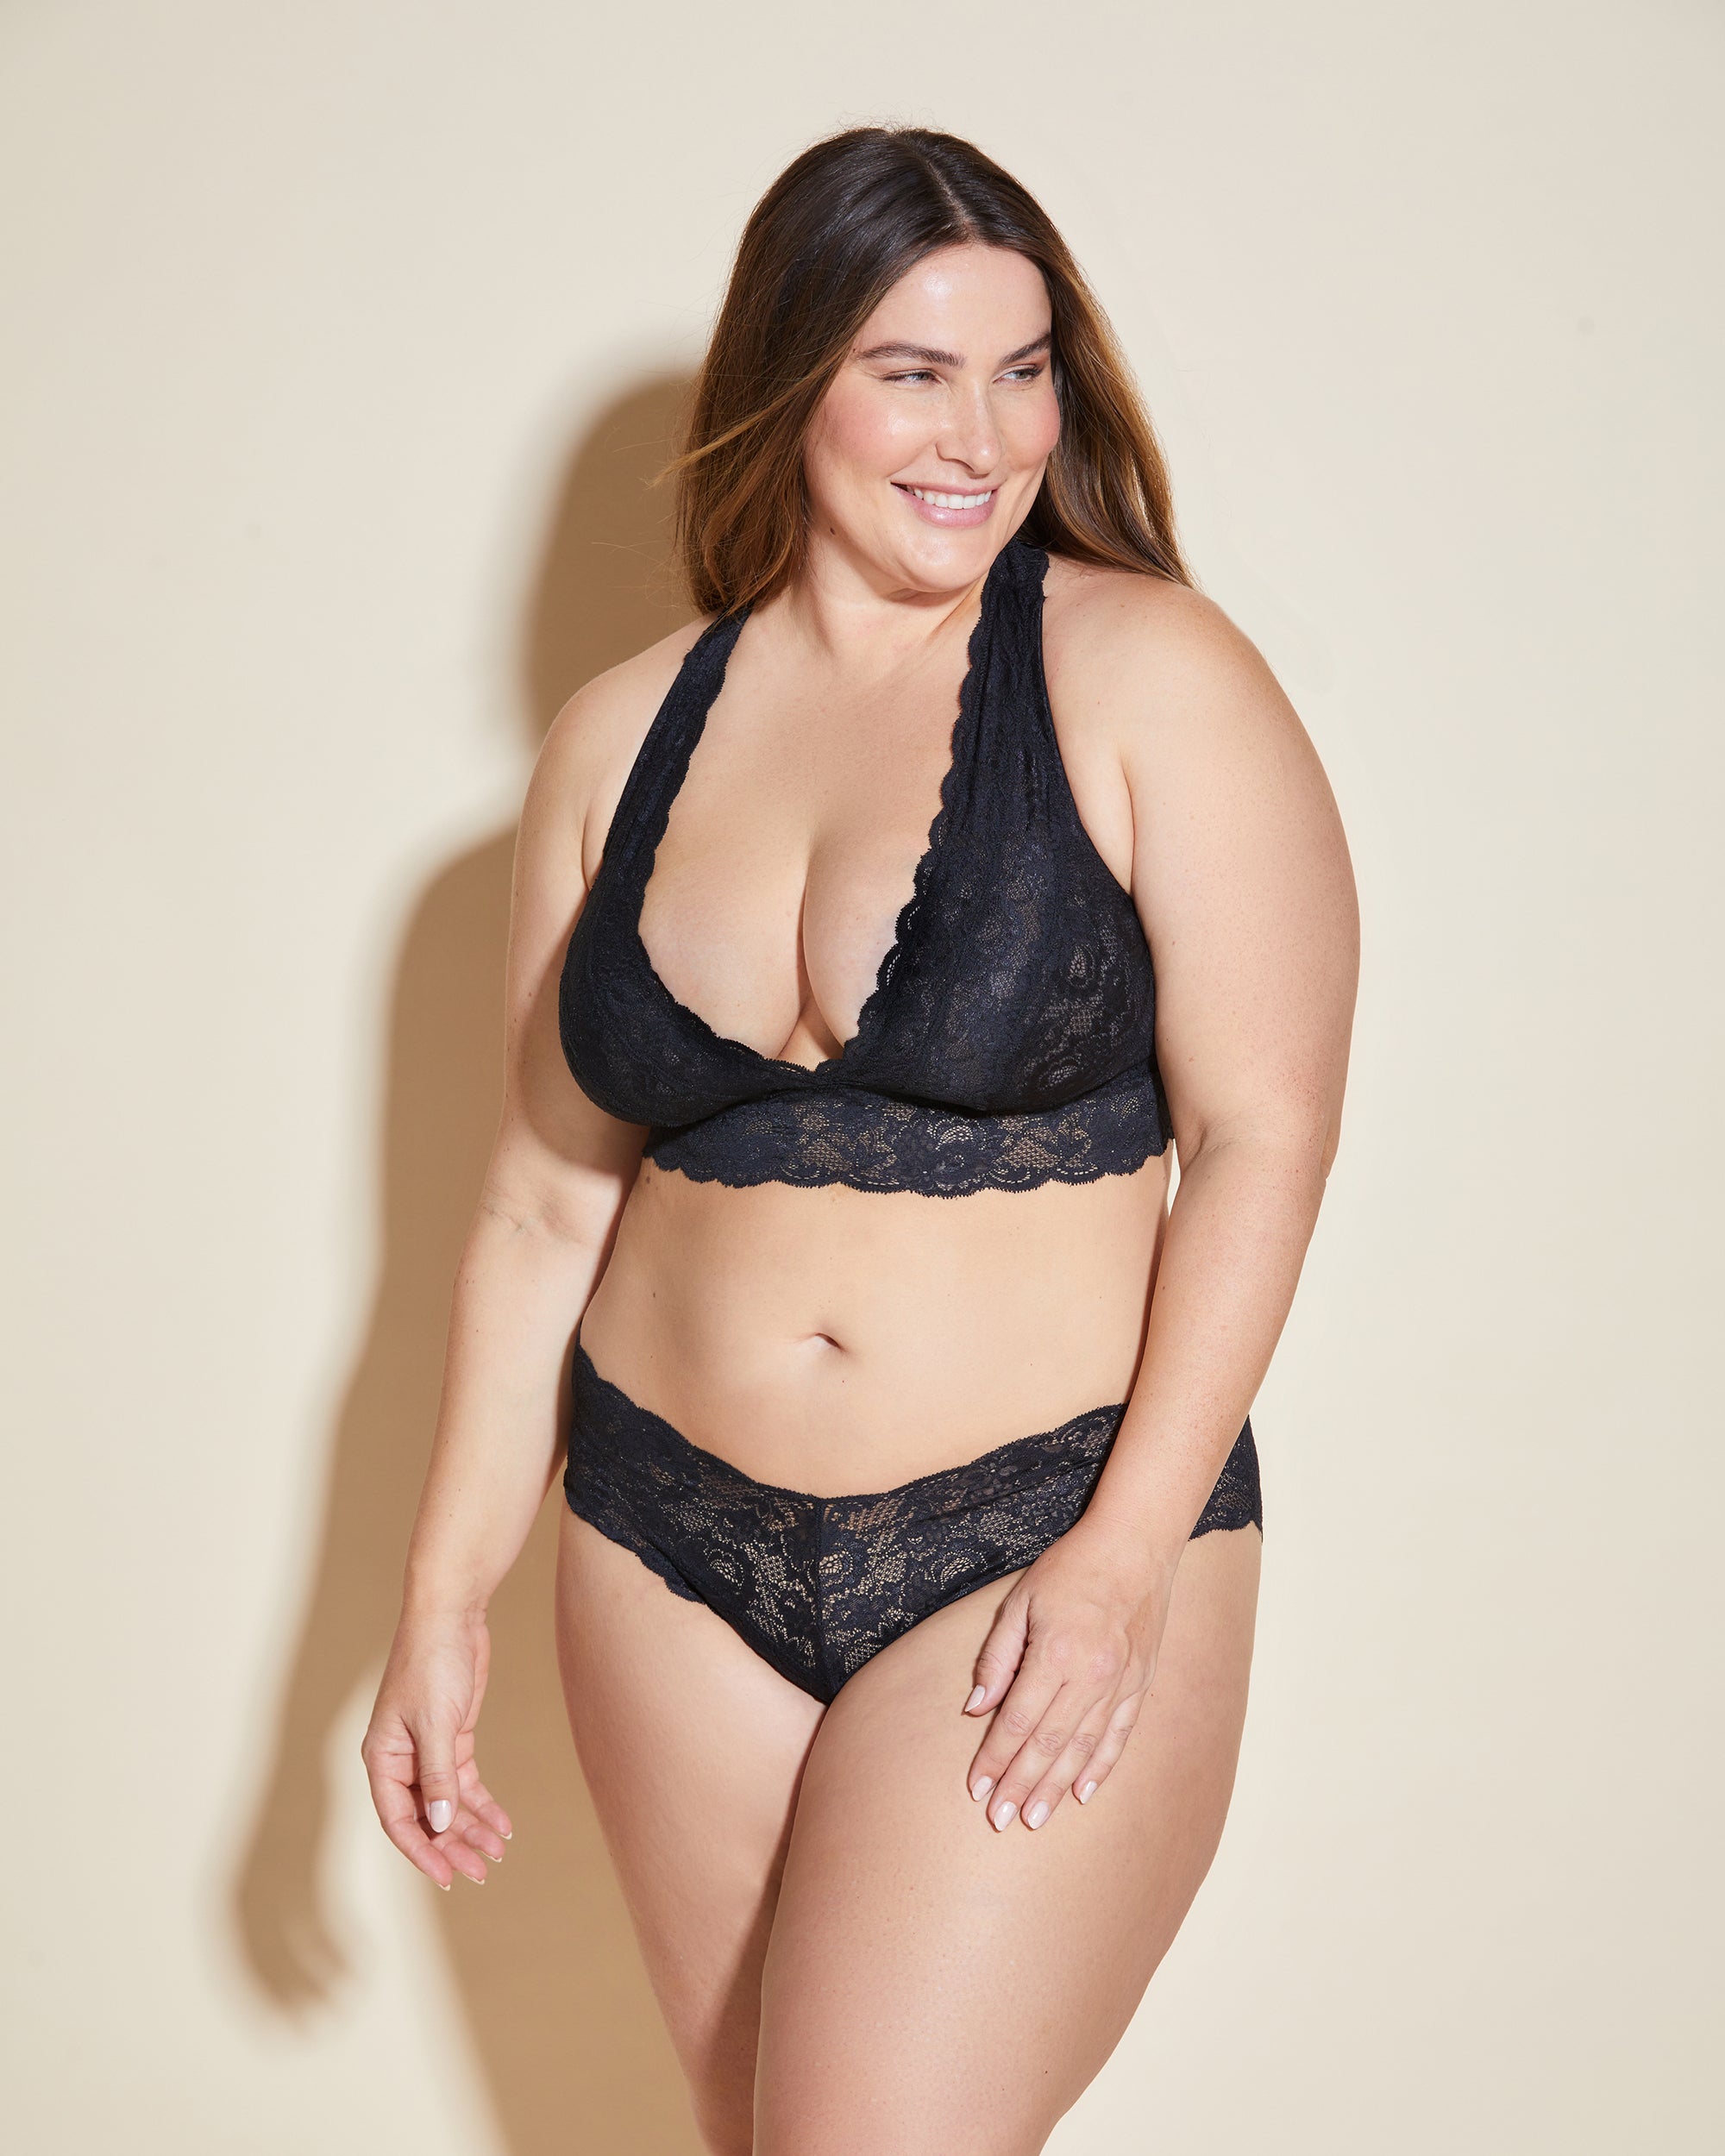 Cosabella Never Say Never Extended Lovelie Mid-Rise Lace Thong| Black